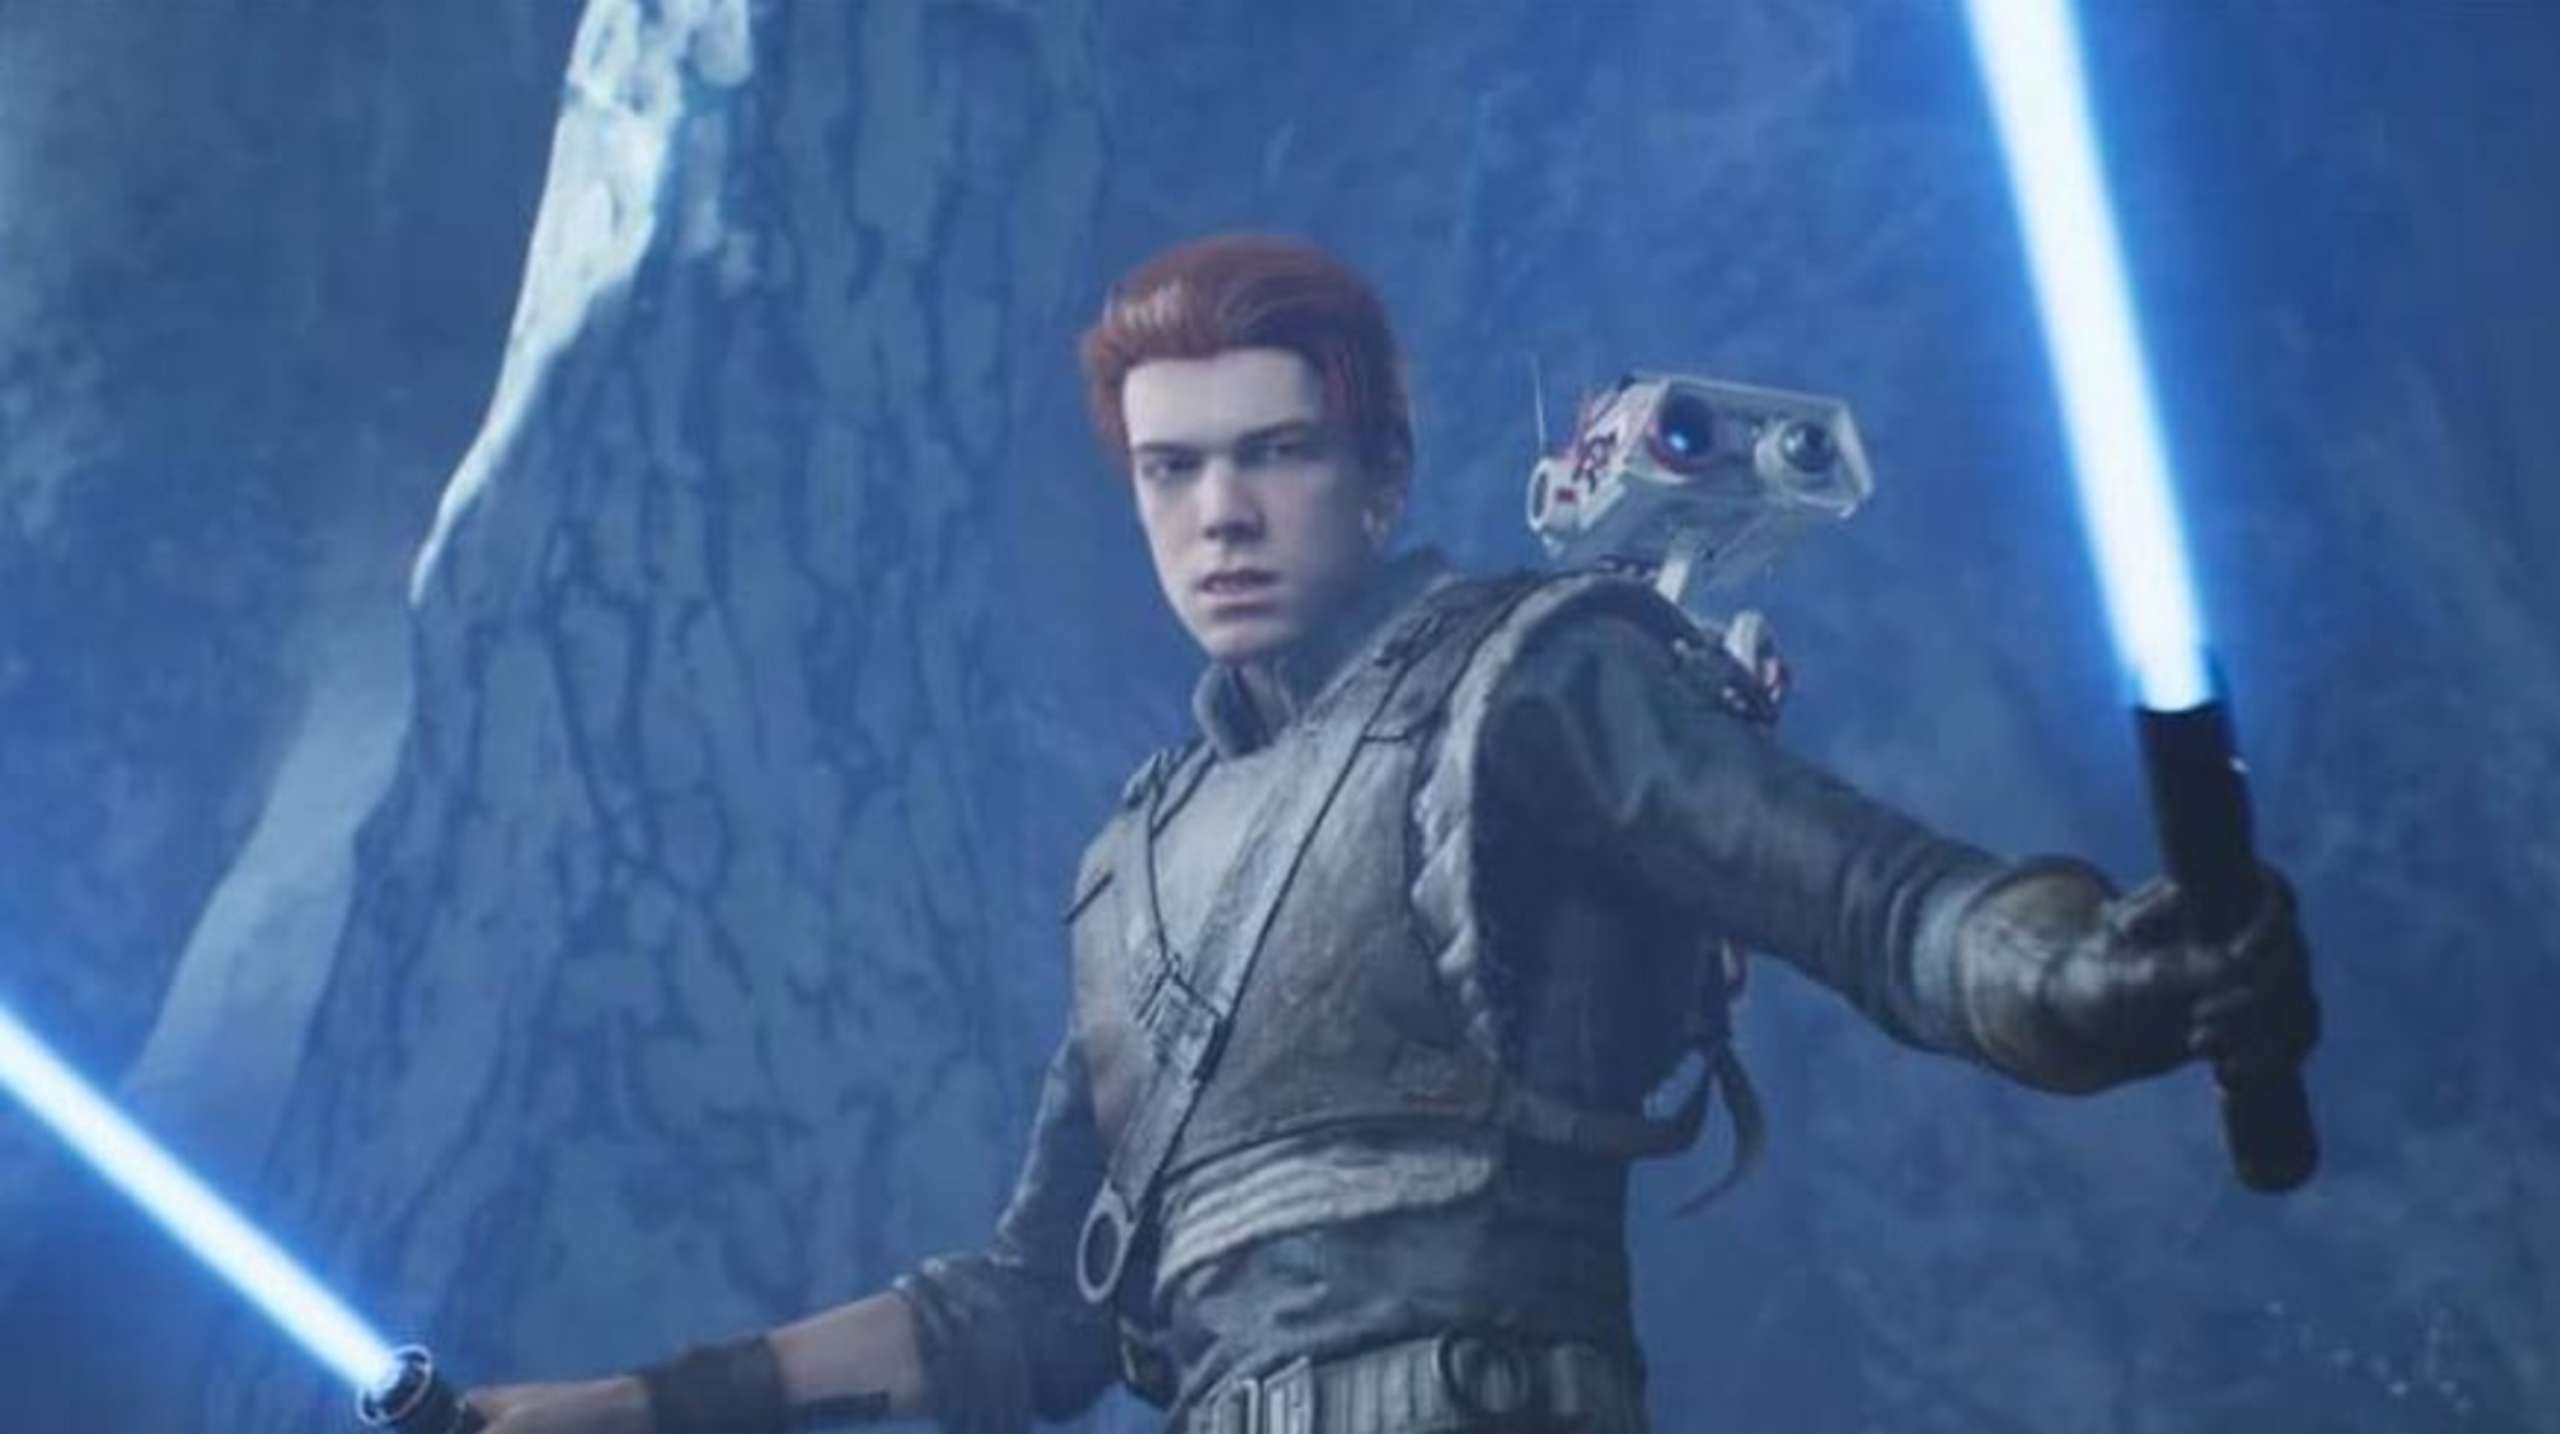 One Star Wars Jedi: Fallen Order Fan Has Chosen To Honor The Game’s Underappreciated Character, Cal Kestis, With Arm Art That Pays Tribute To The Jedi Master